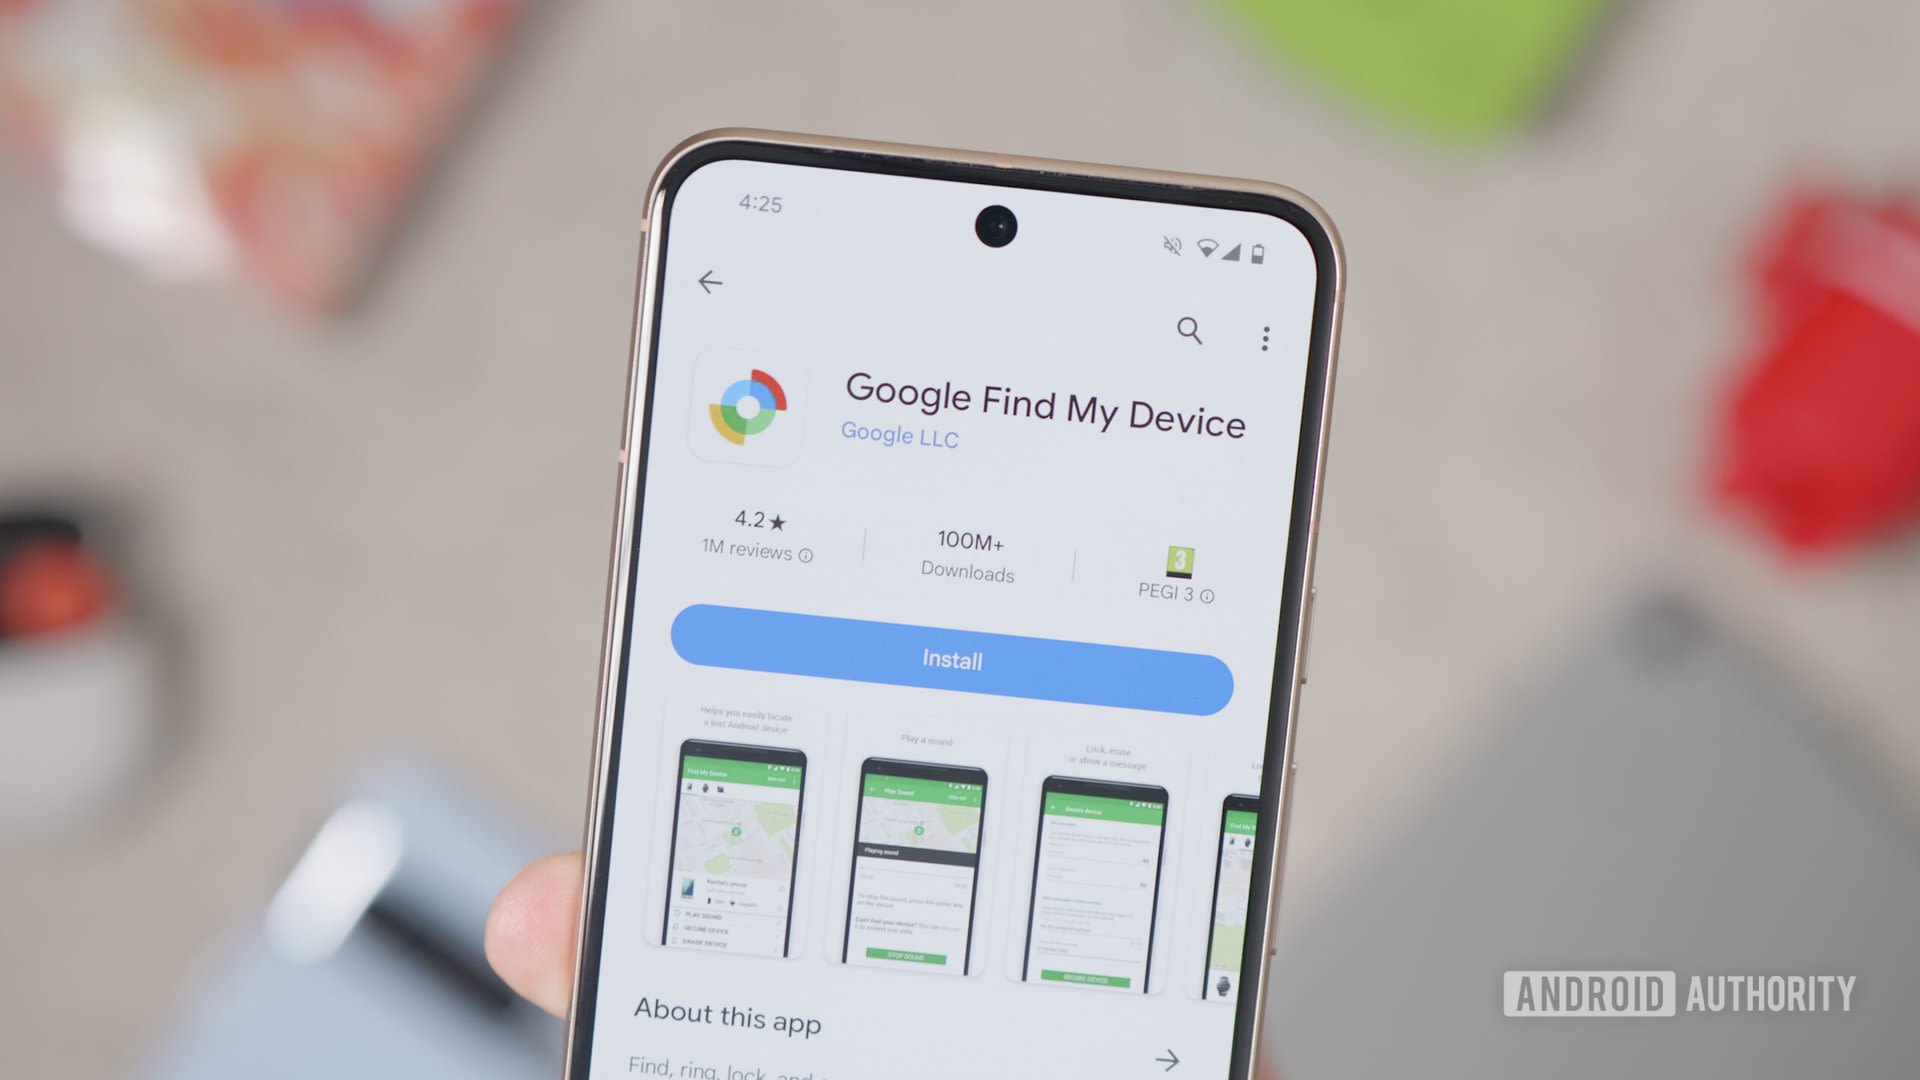 Google's Find My Device could soon get UWB and AR upgrades (APK teardown)